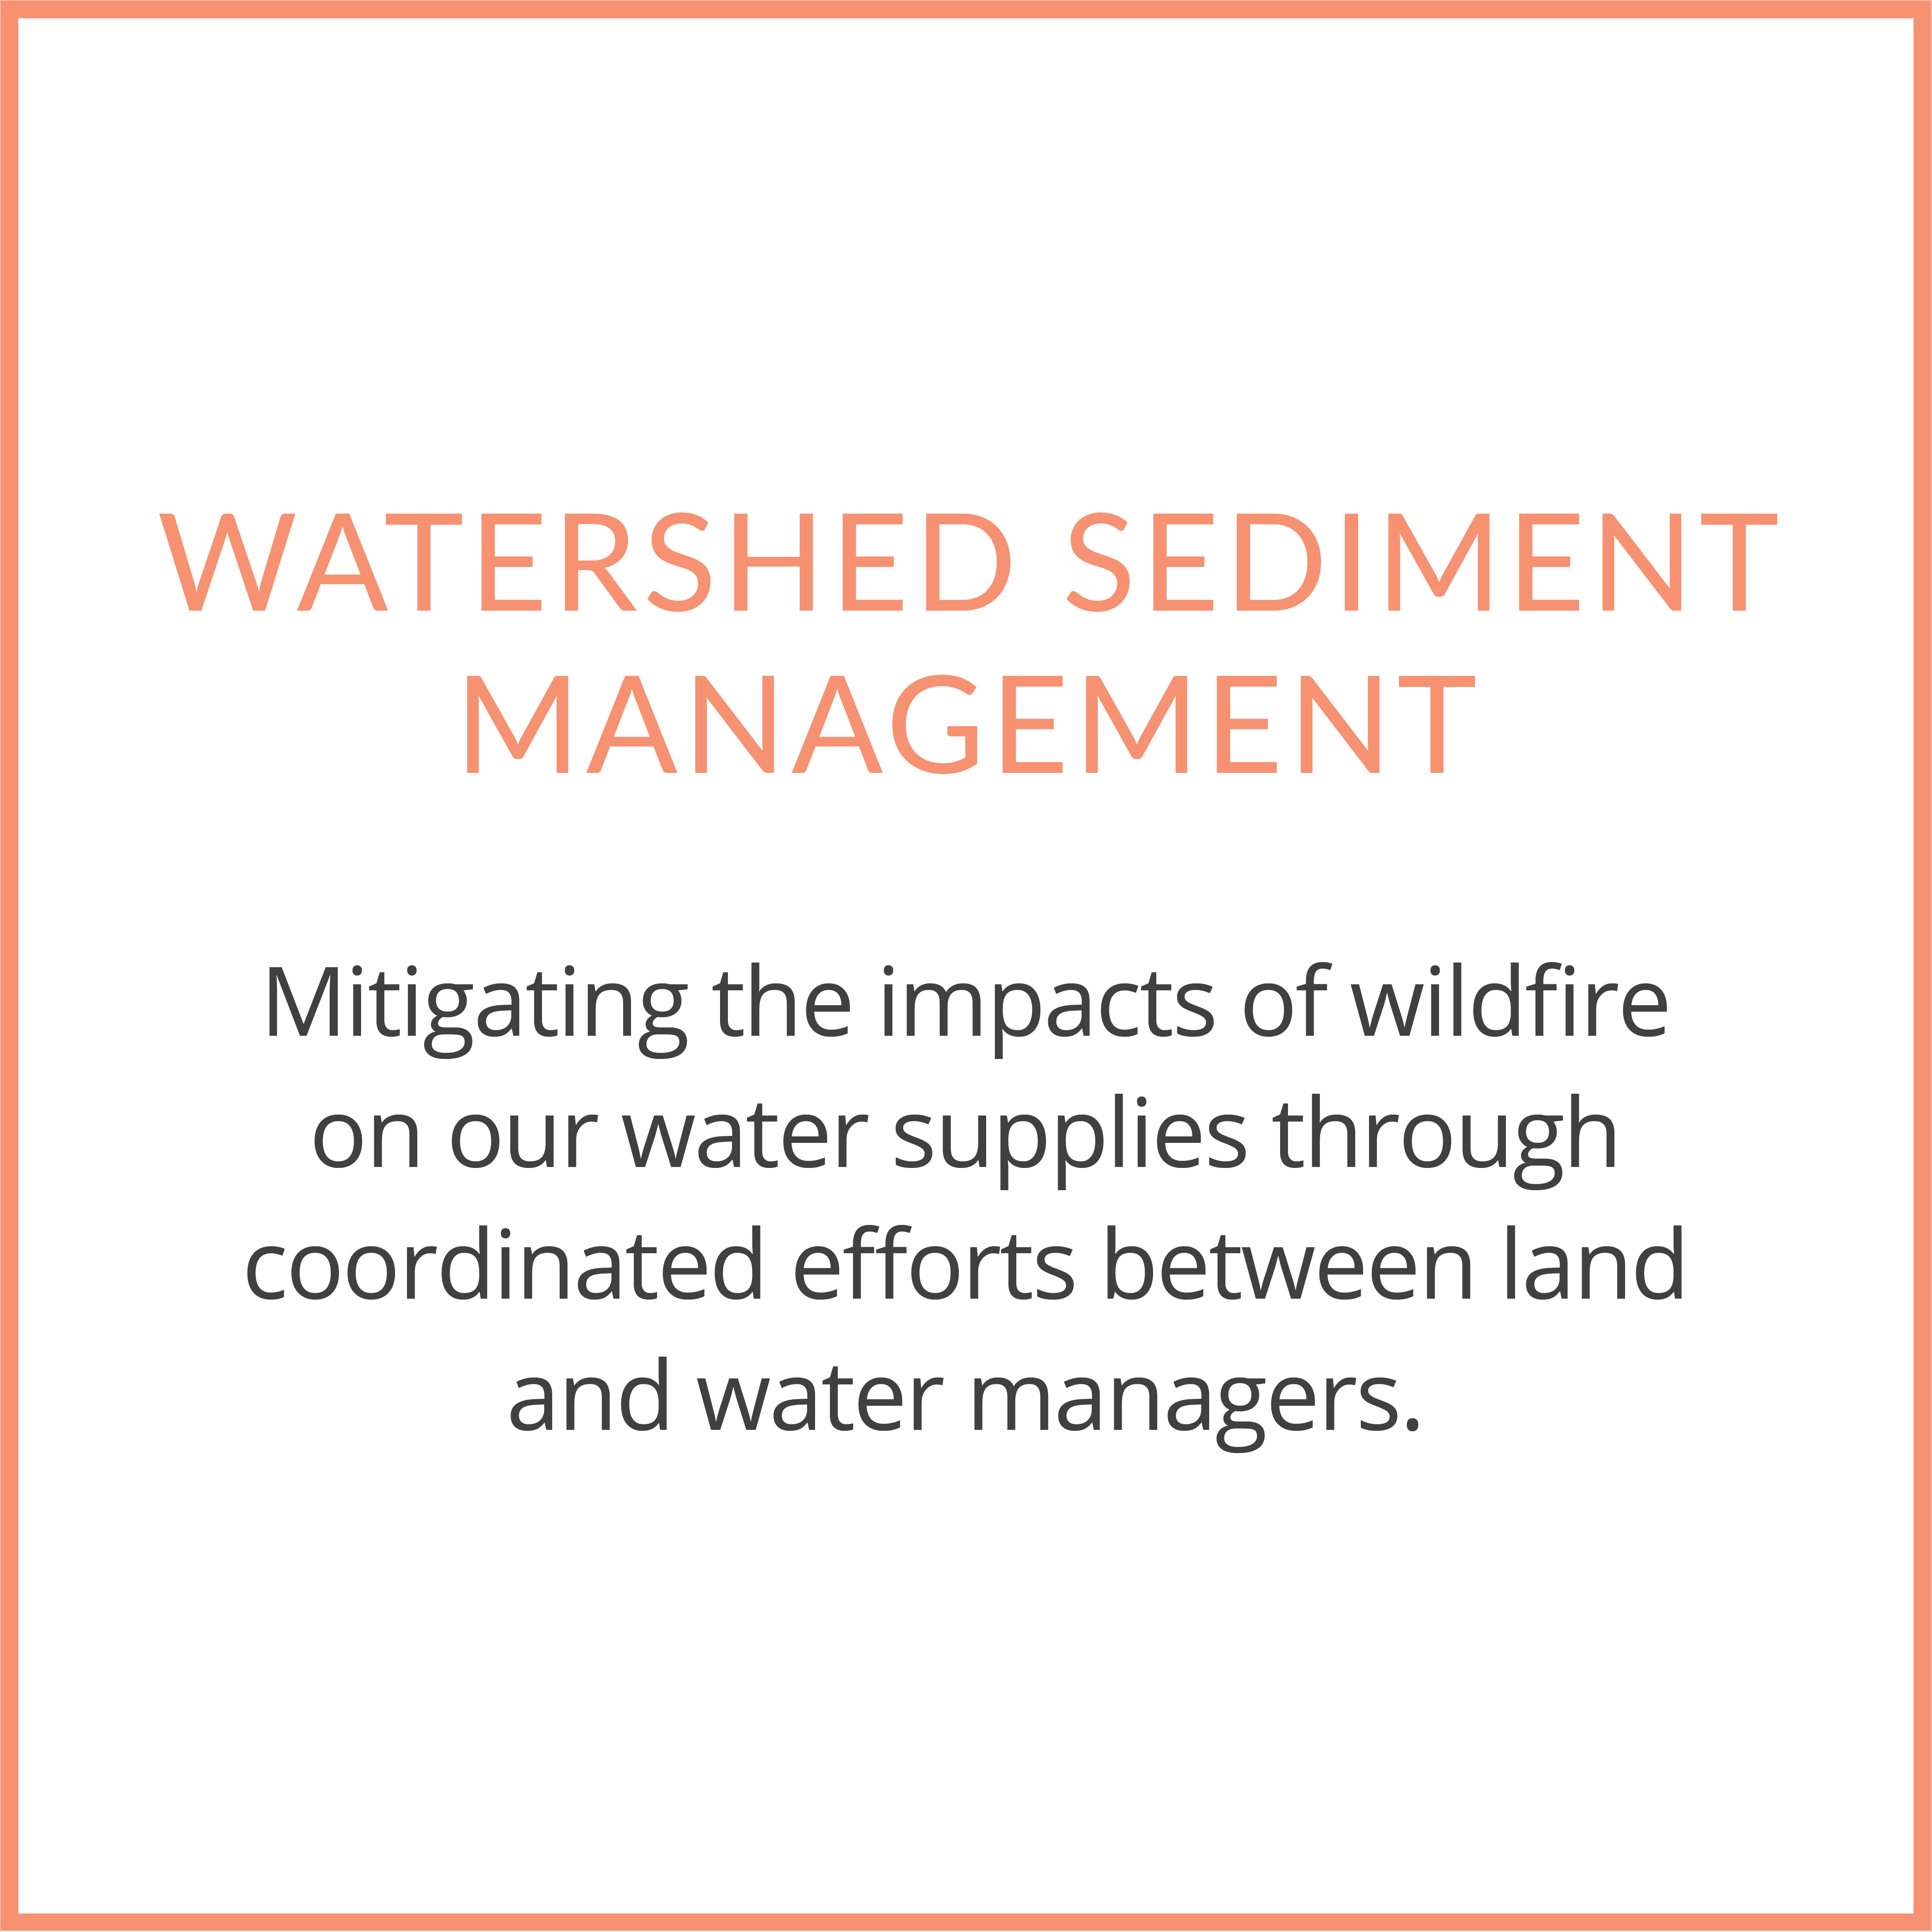 watershed management definition